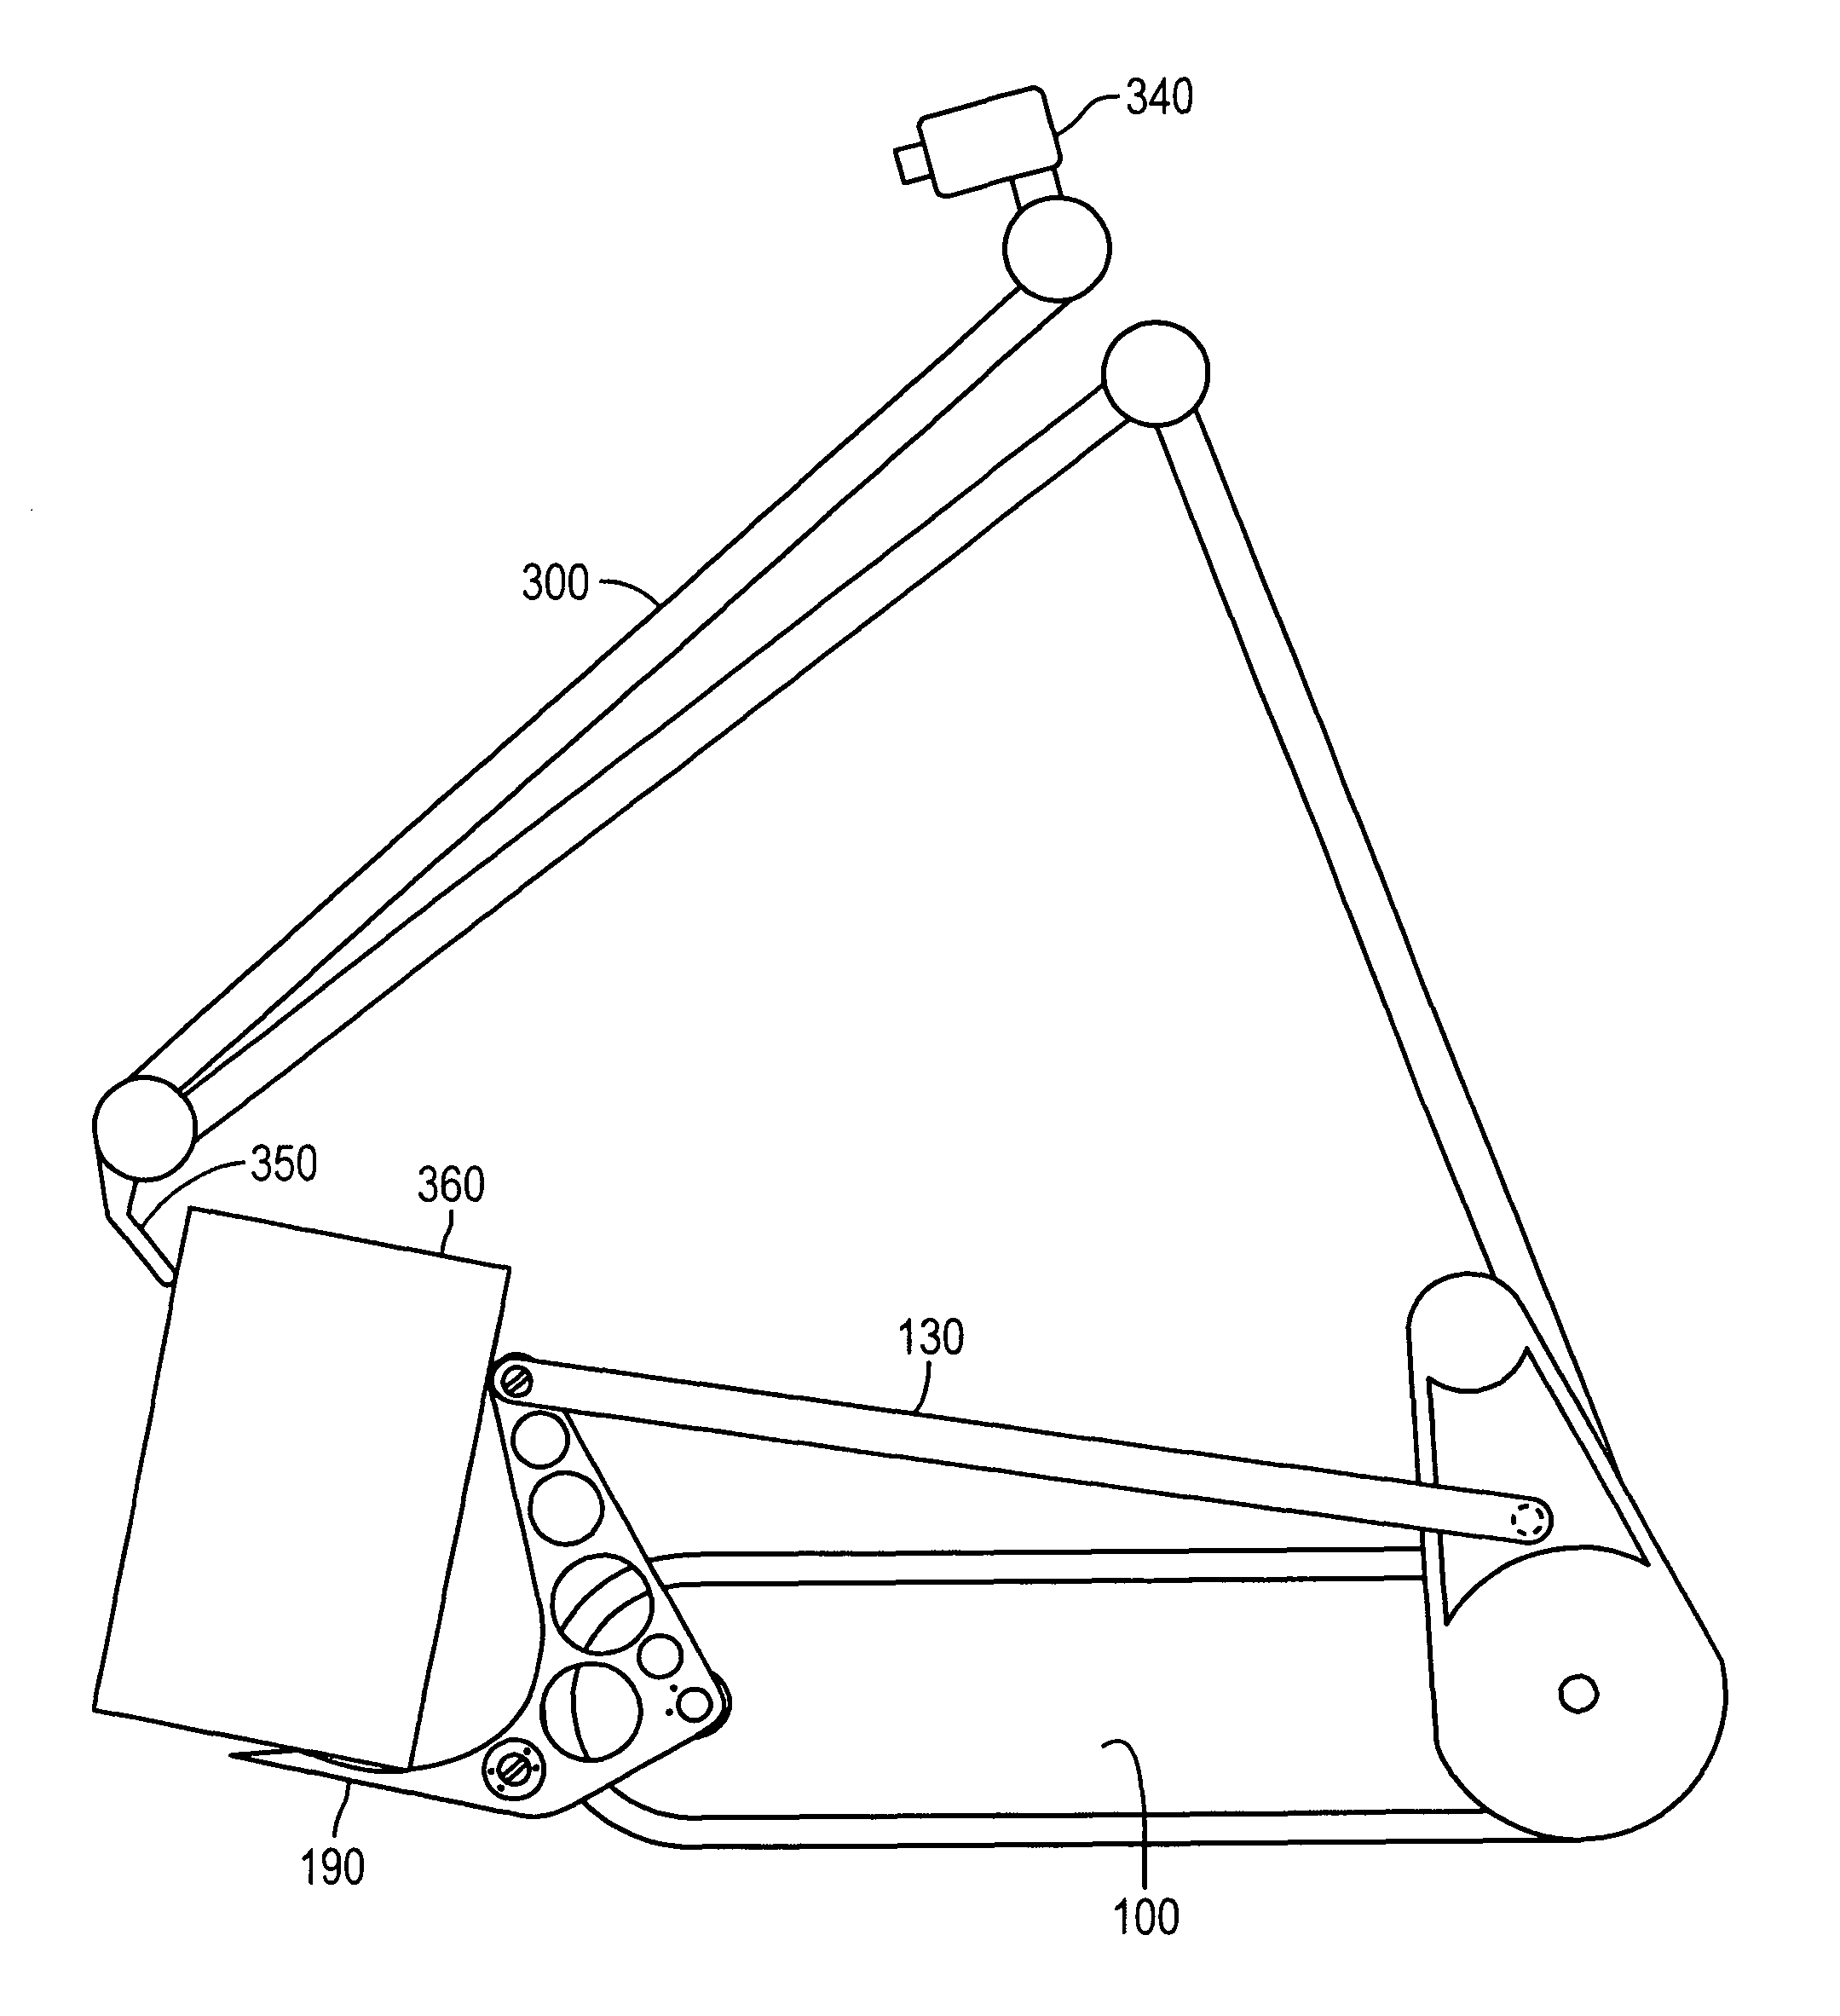 Lifting apparatus for remote controlled robotic device